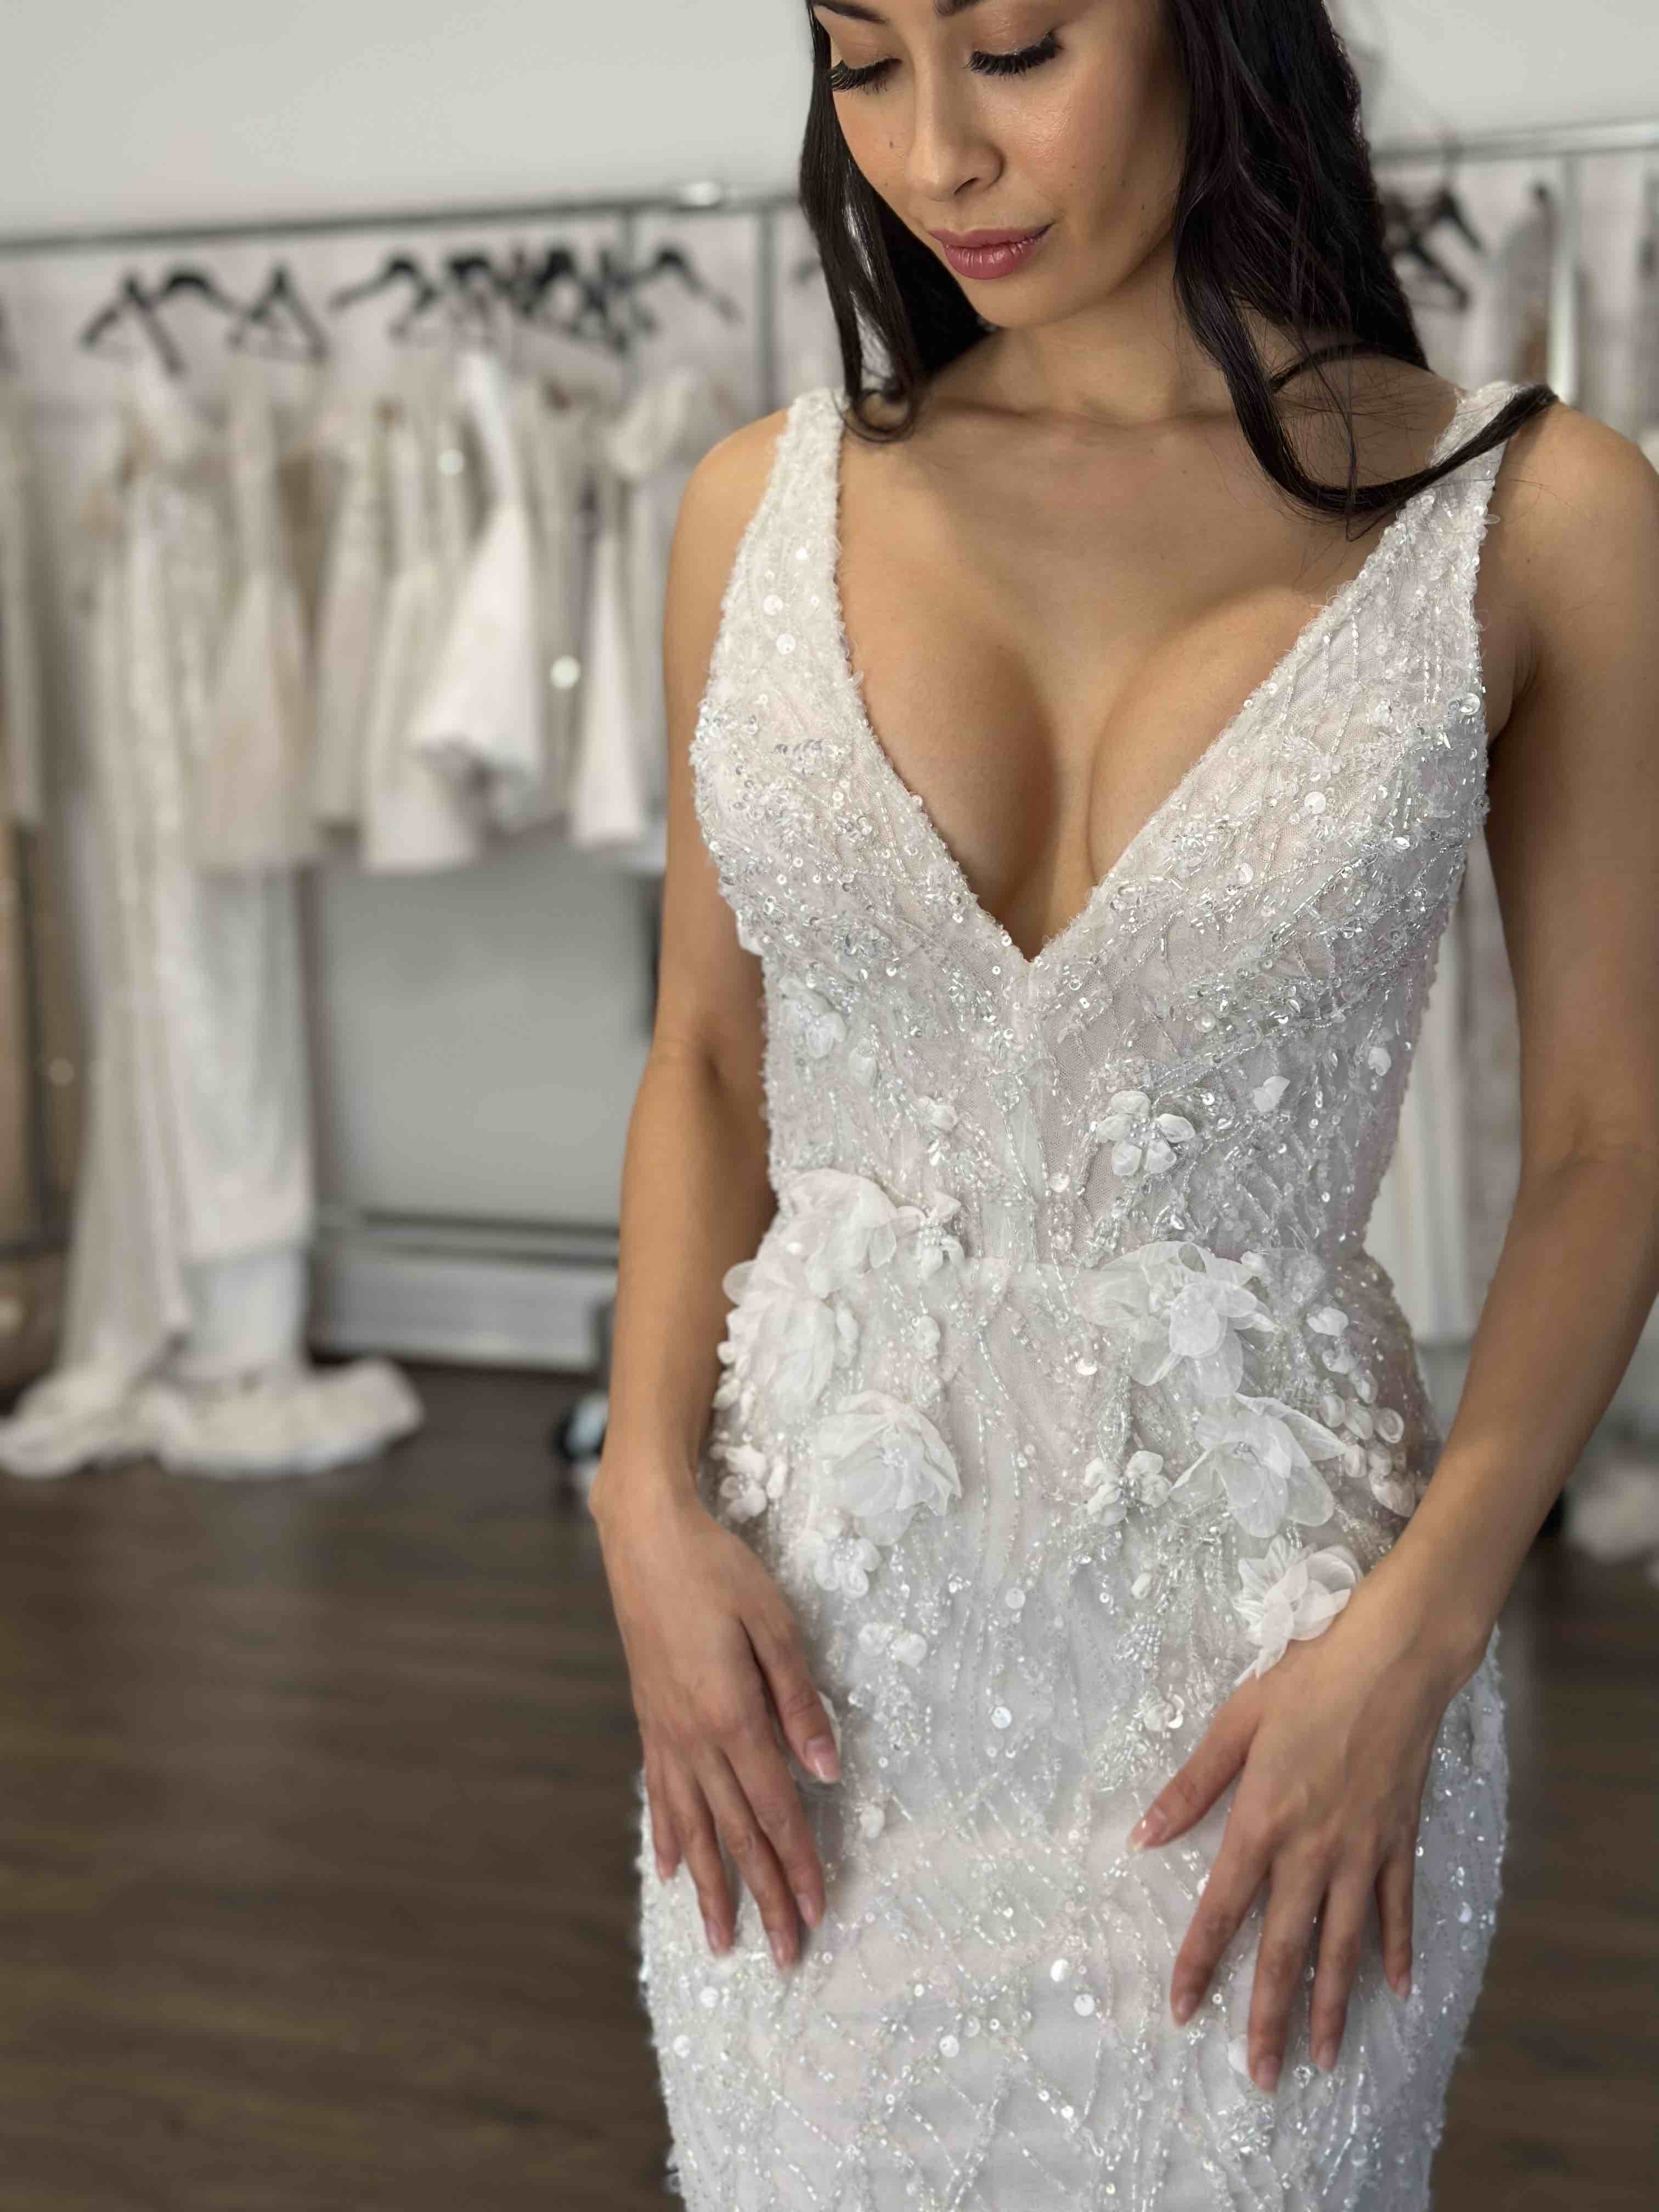 woman with hands at her side wearing beaded gown at bridal store